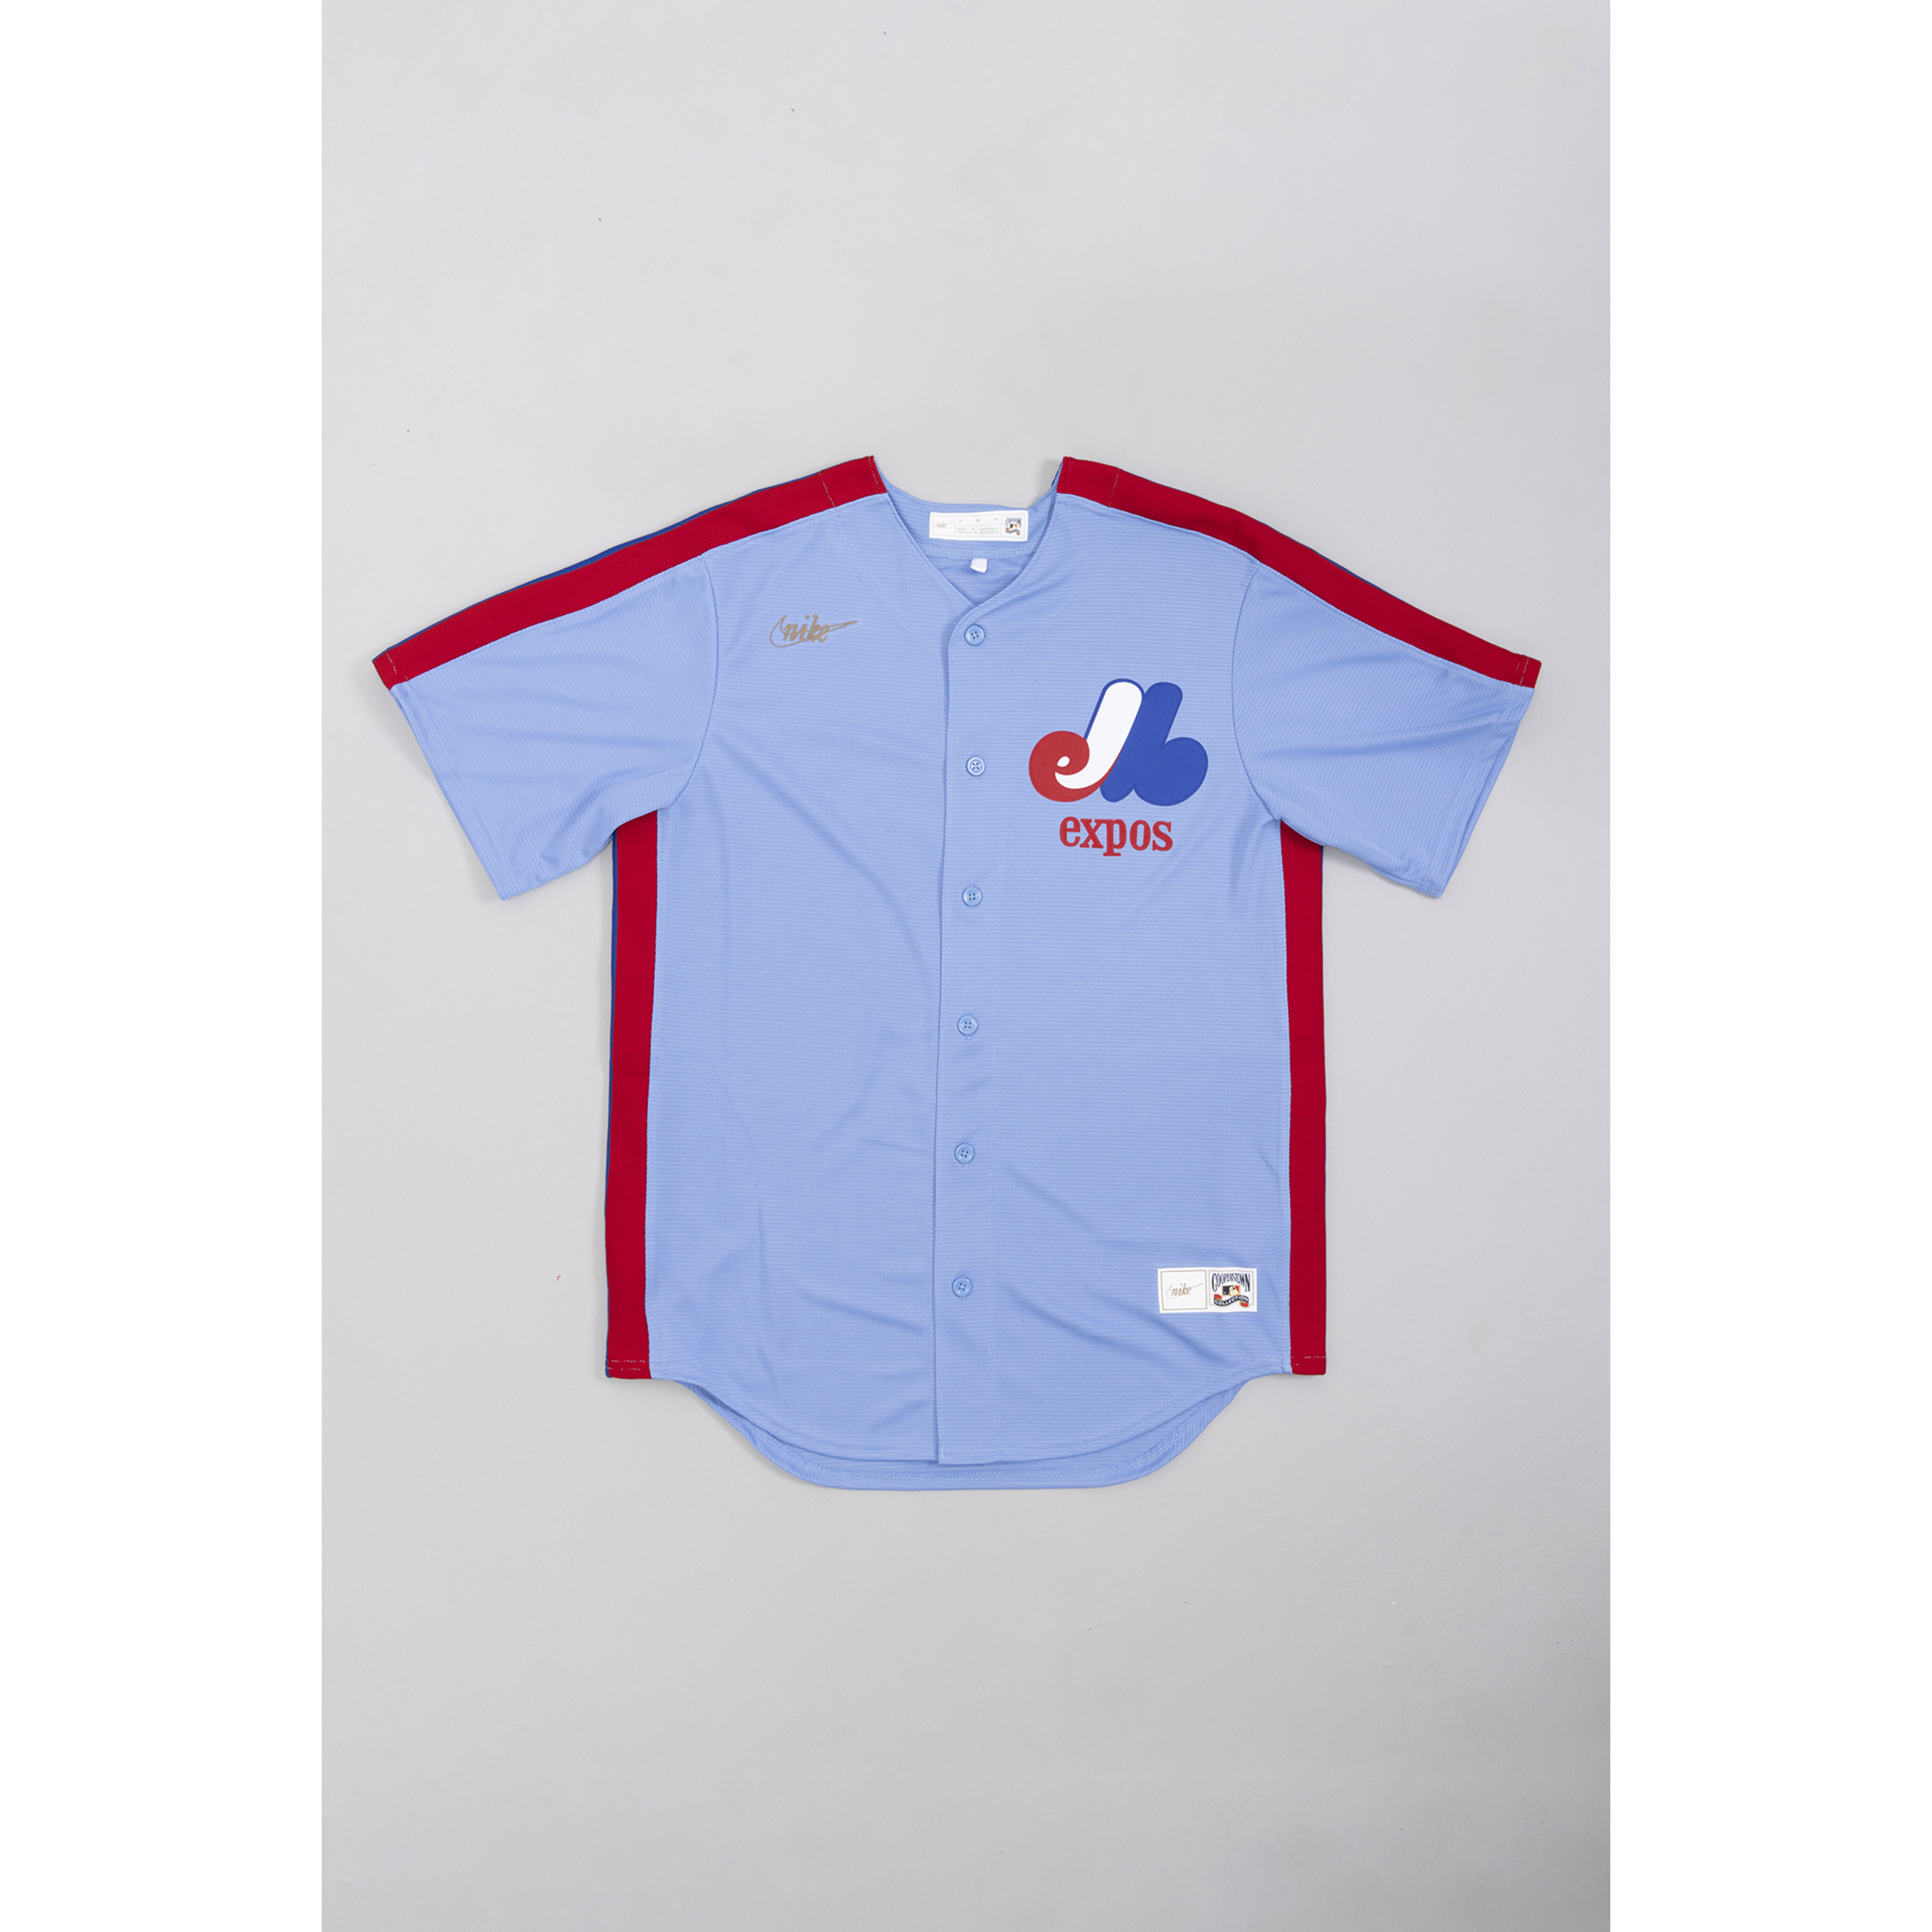 Vladimir Guerrero Montreal Expos #27 Blue Mitchell & Ness Jersey Size 44  auth